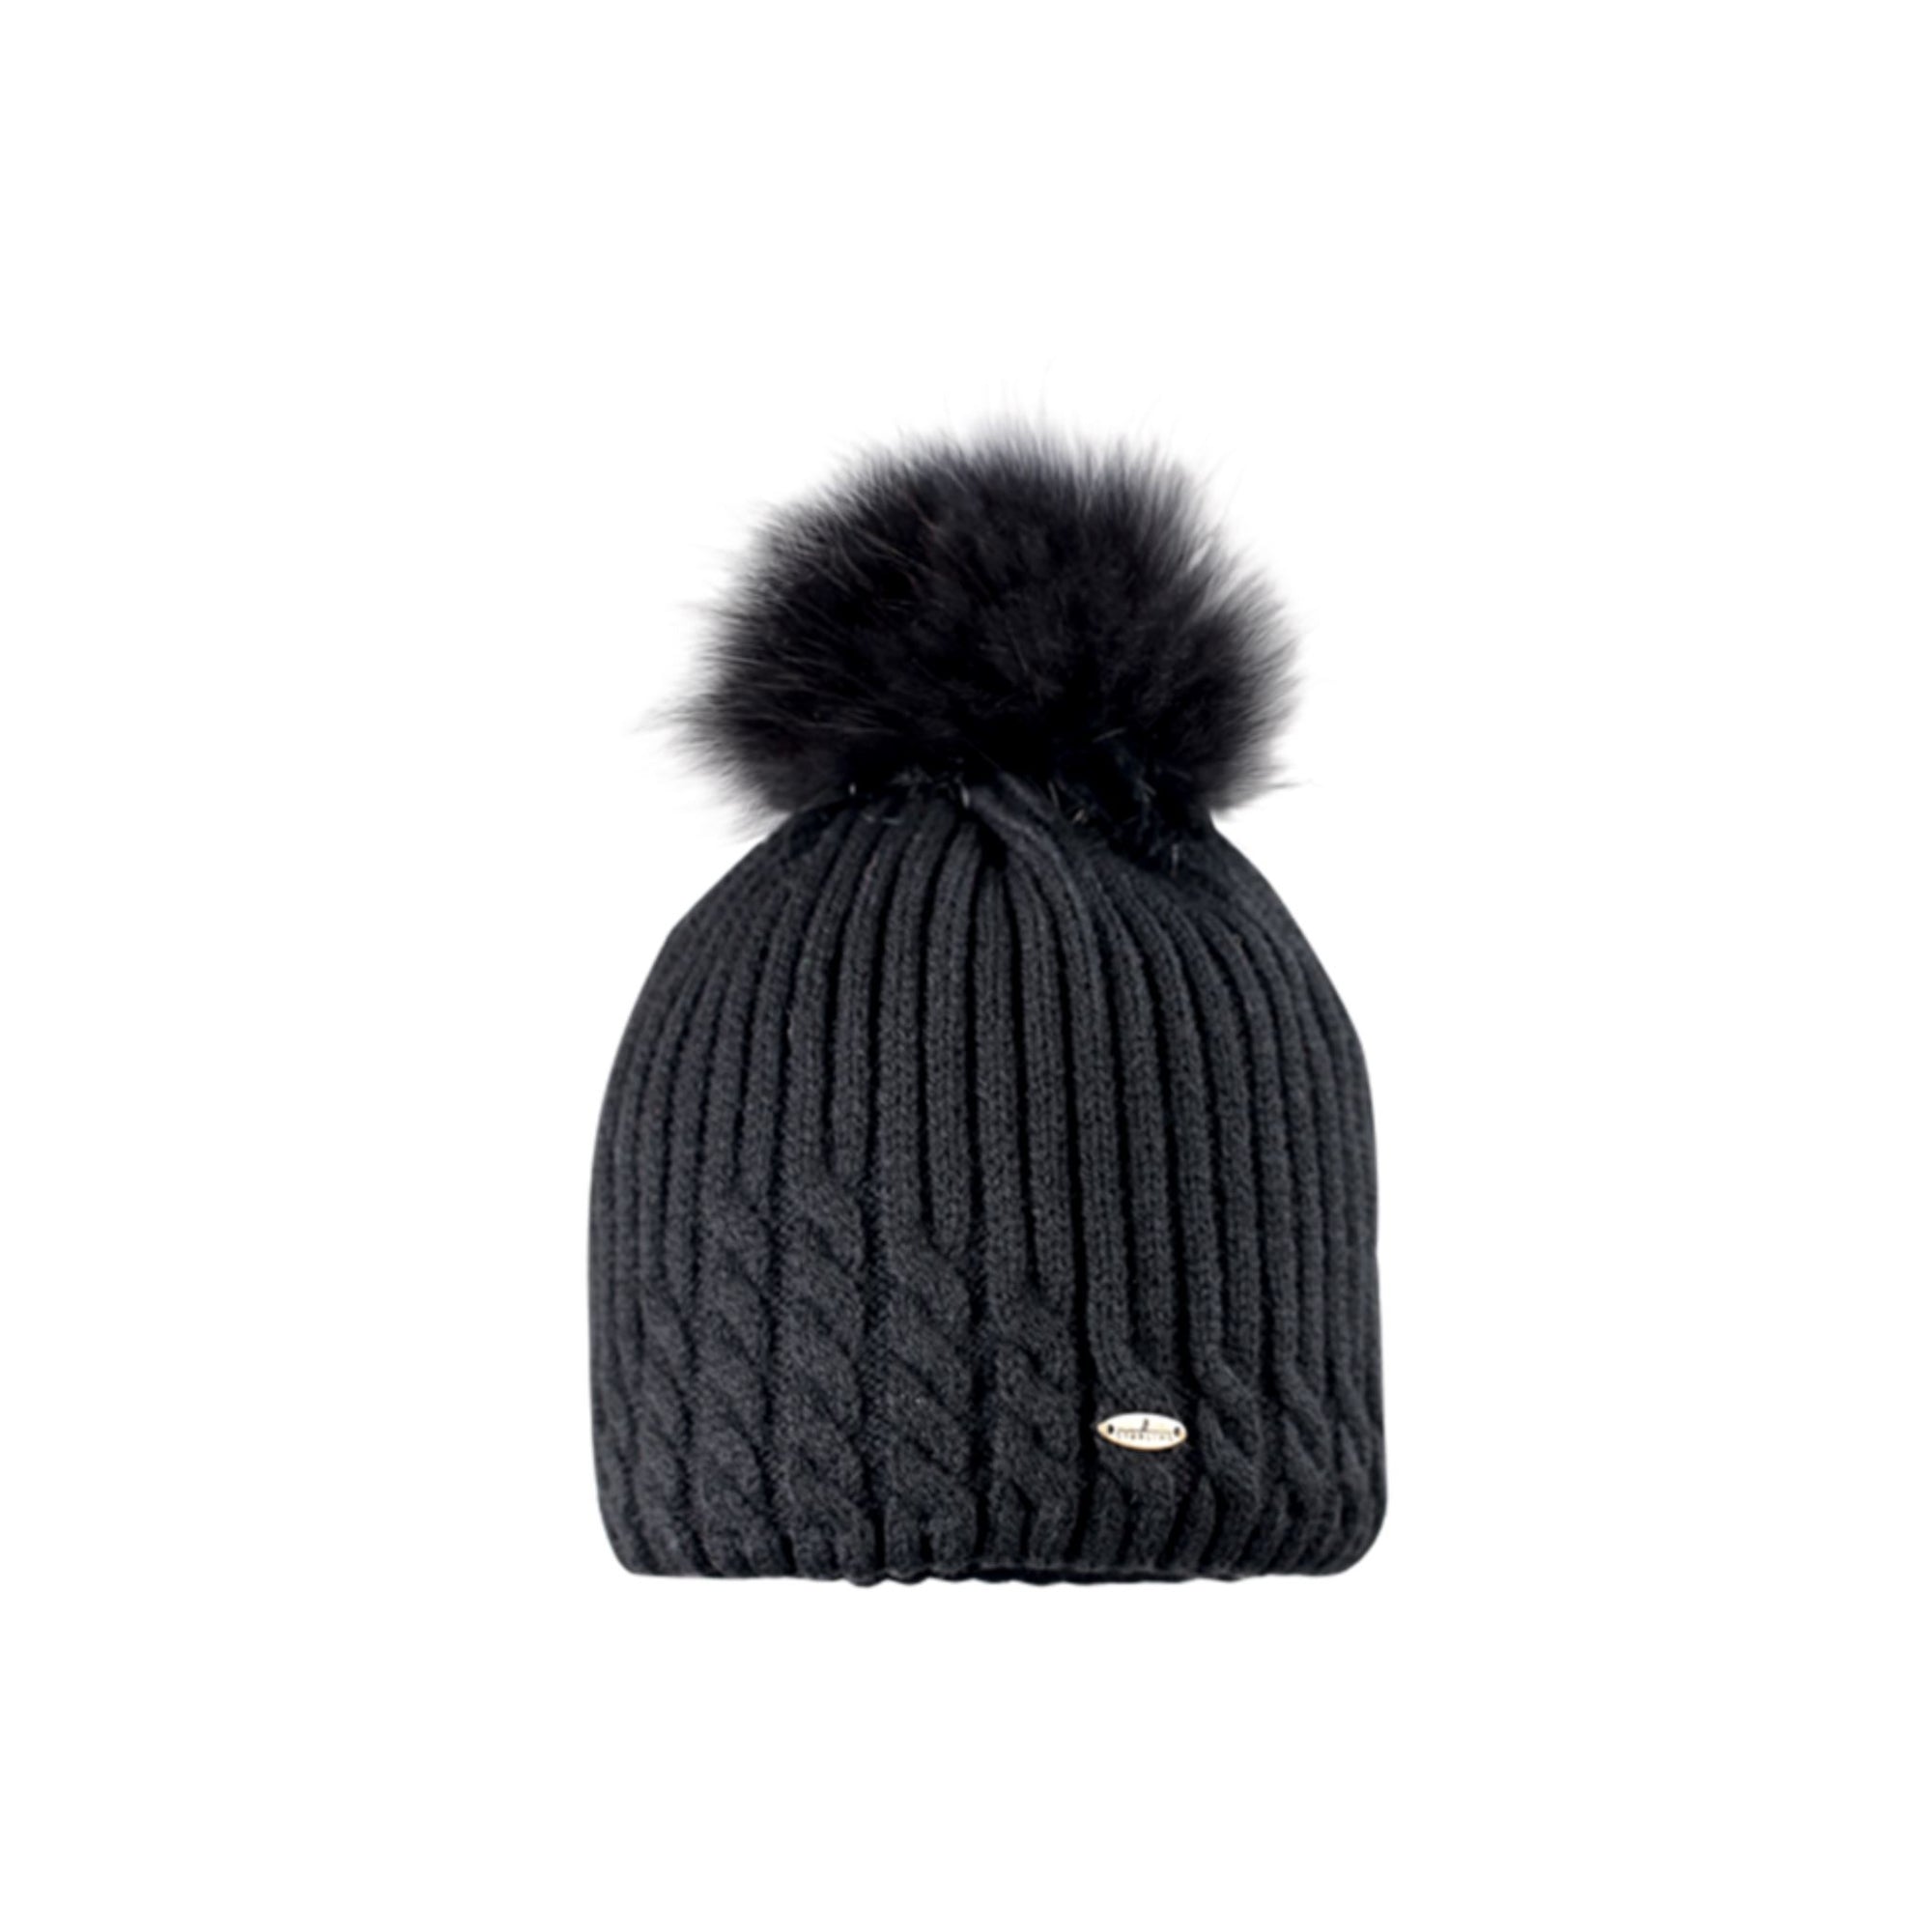 Starling Beanie Dione - Black Beanies Starling 